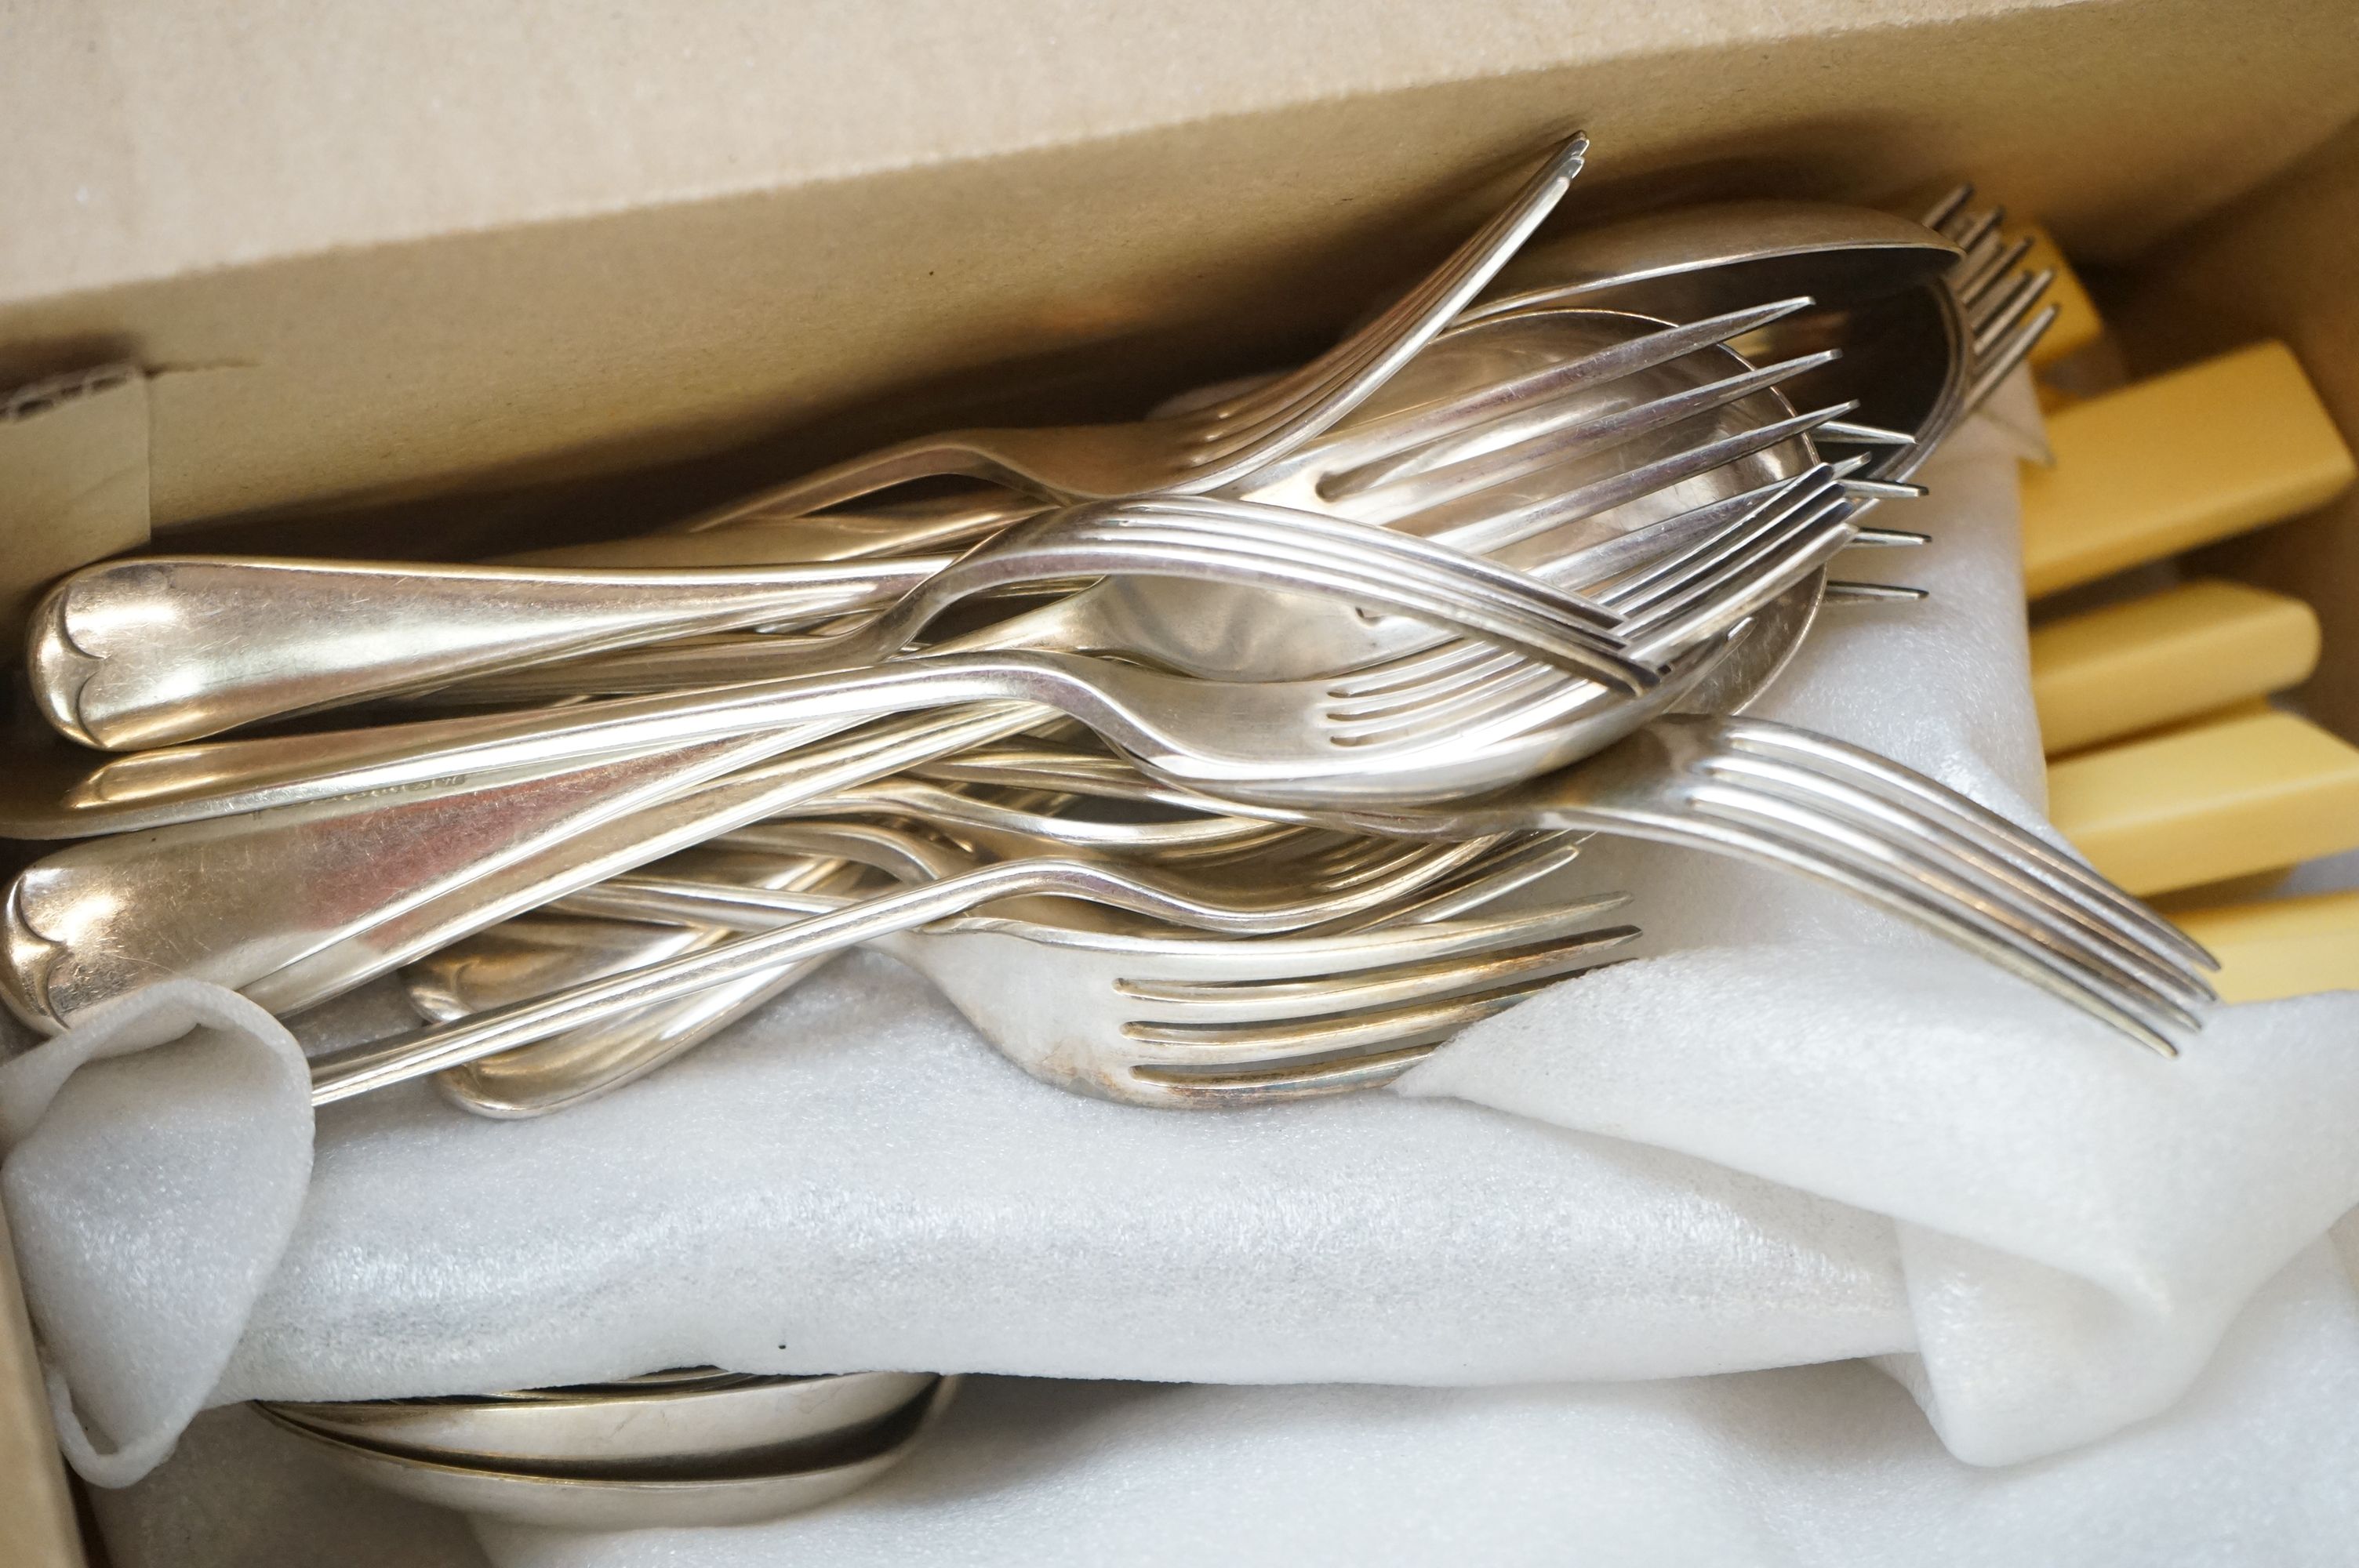 A collection of vintage and silver-plated cutlery / flatware together with a quantity of napkin - Image 9 of 16